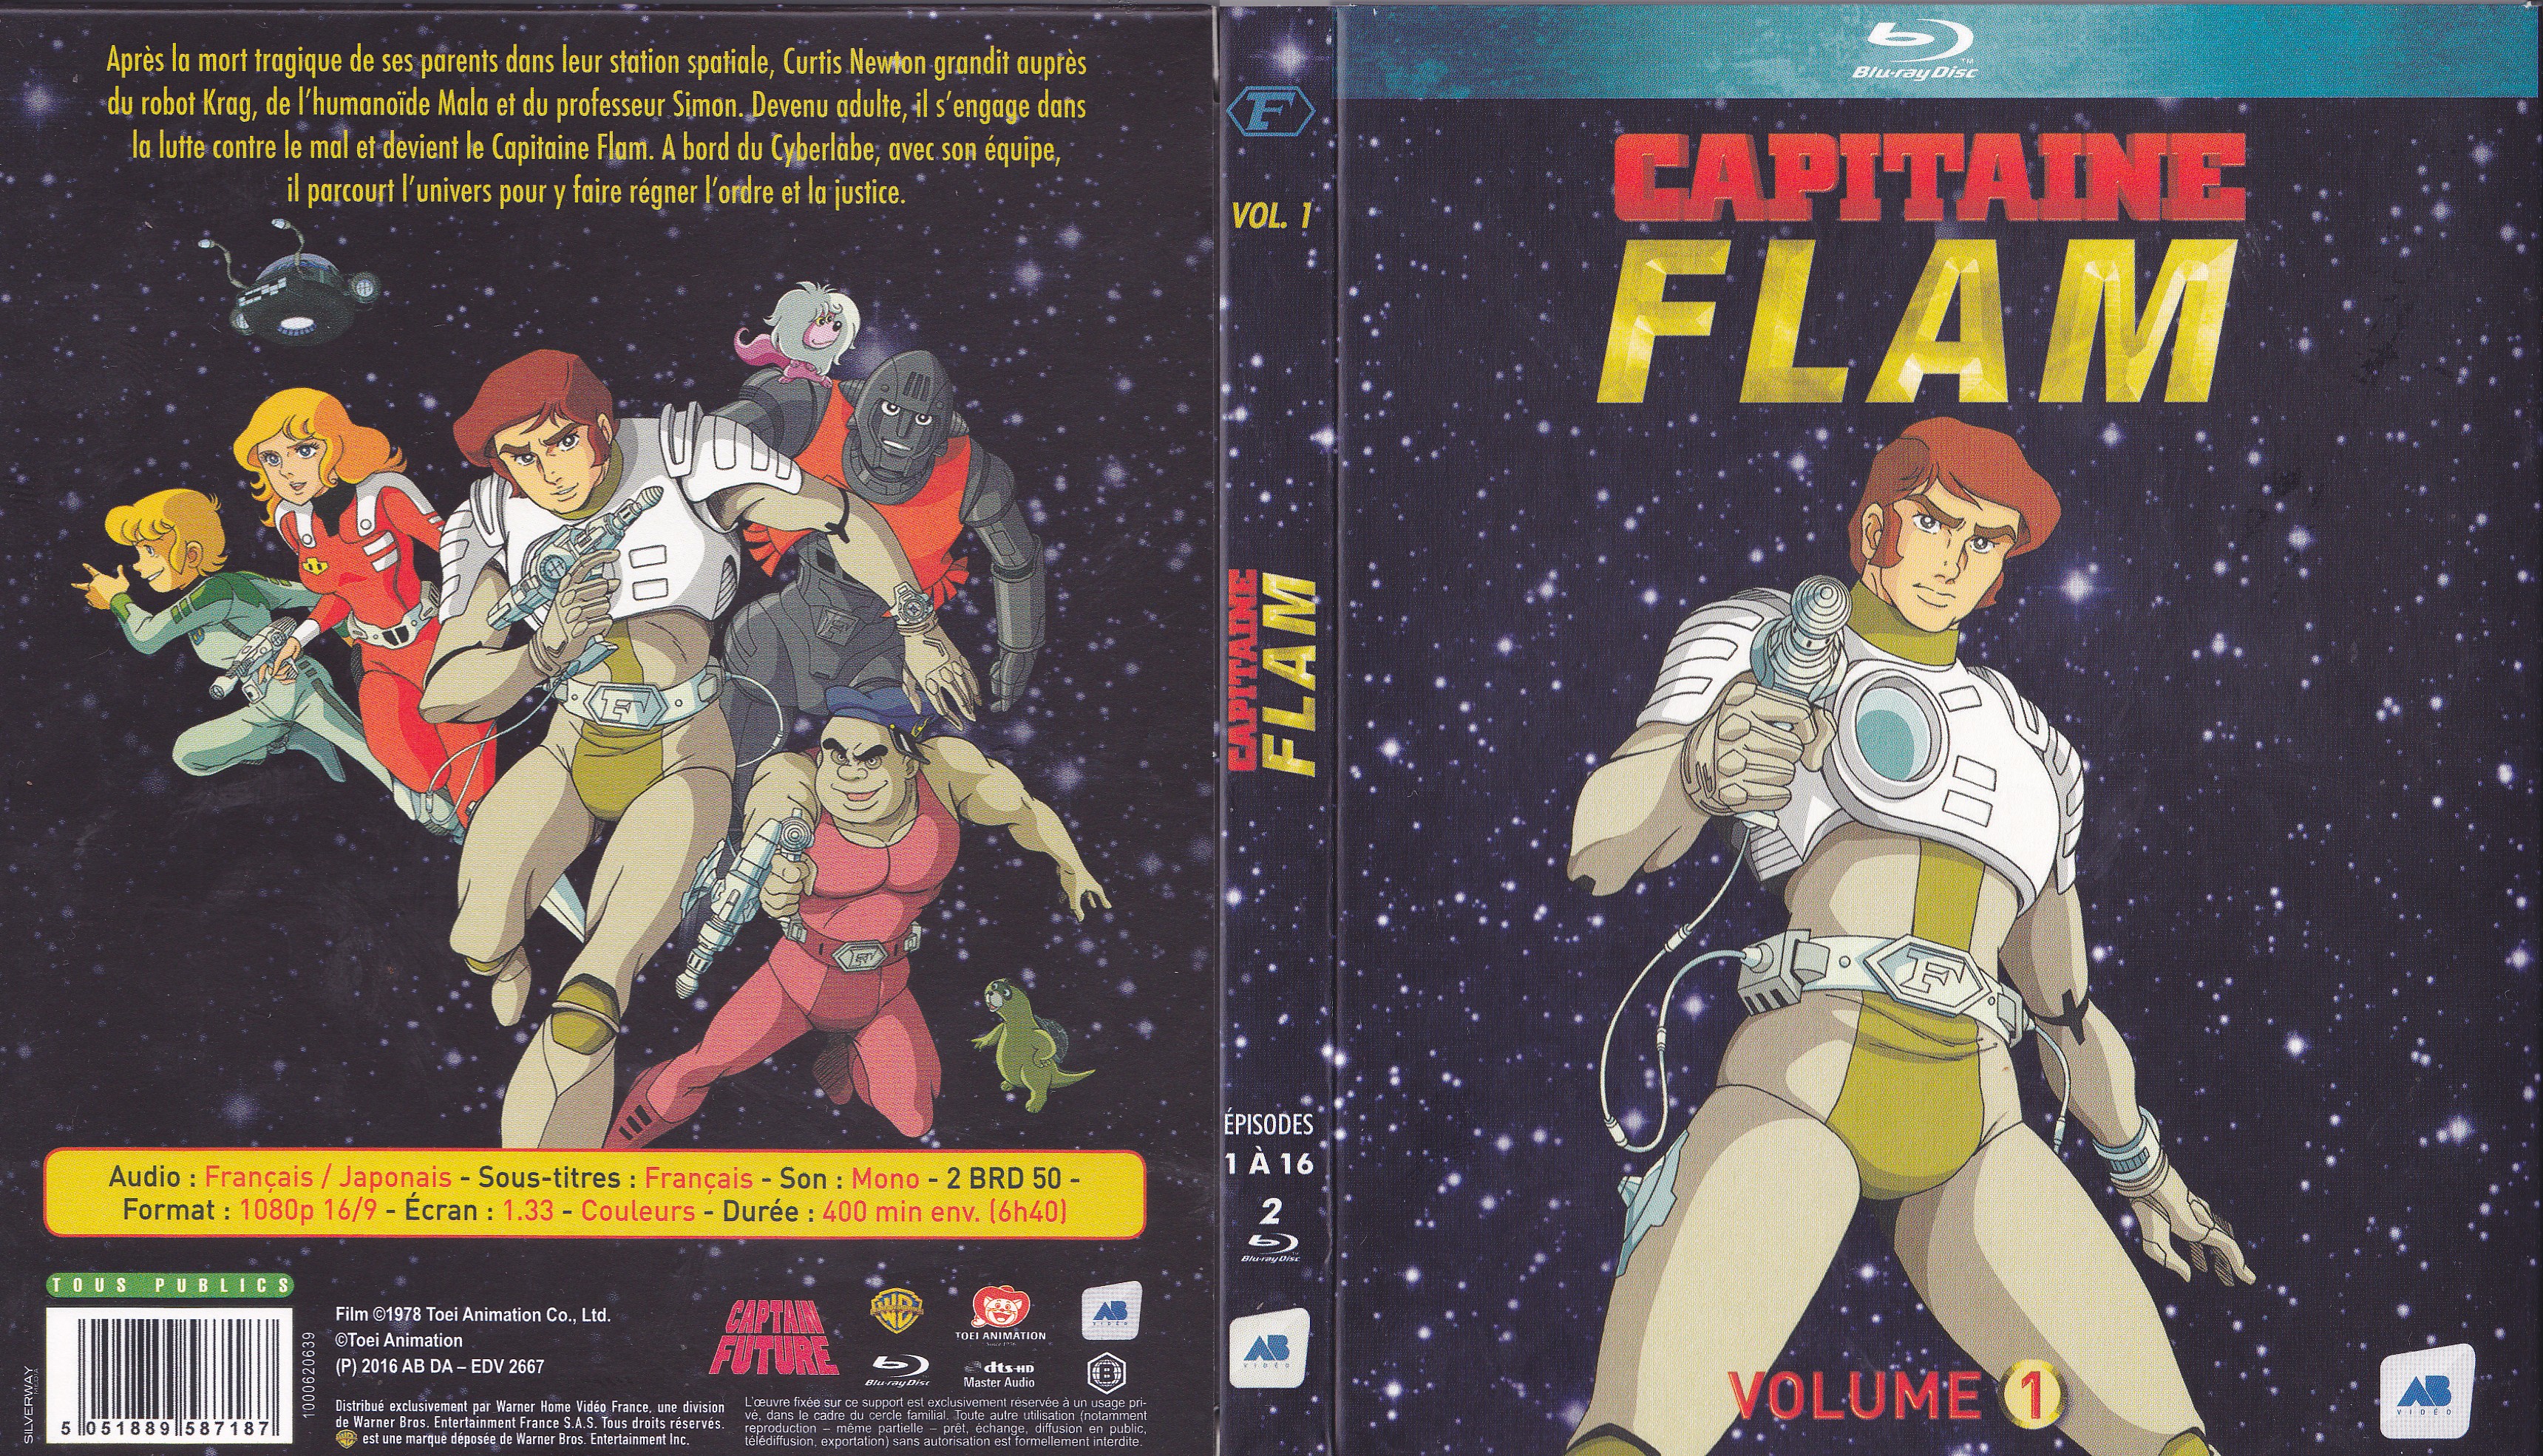 Jaquette DVD Capitaine Flam vol 1 (BLU-RAY)